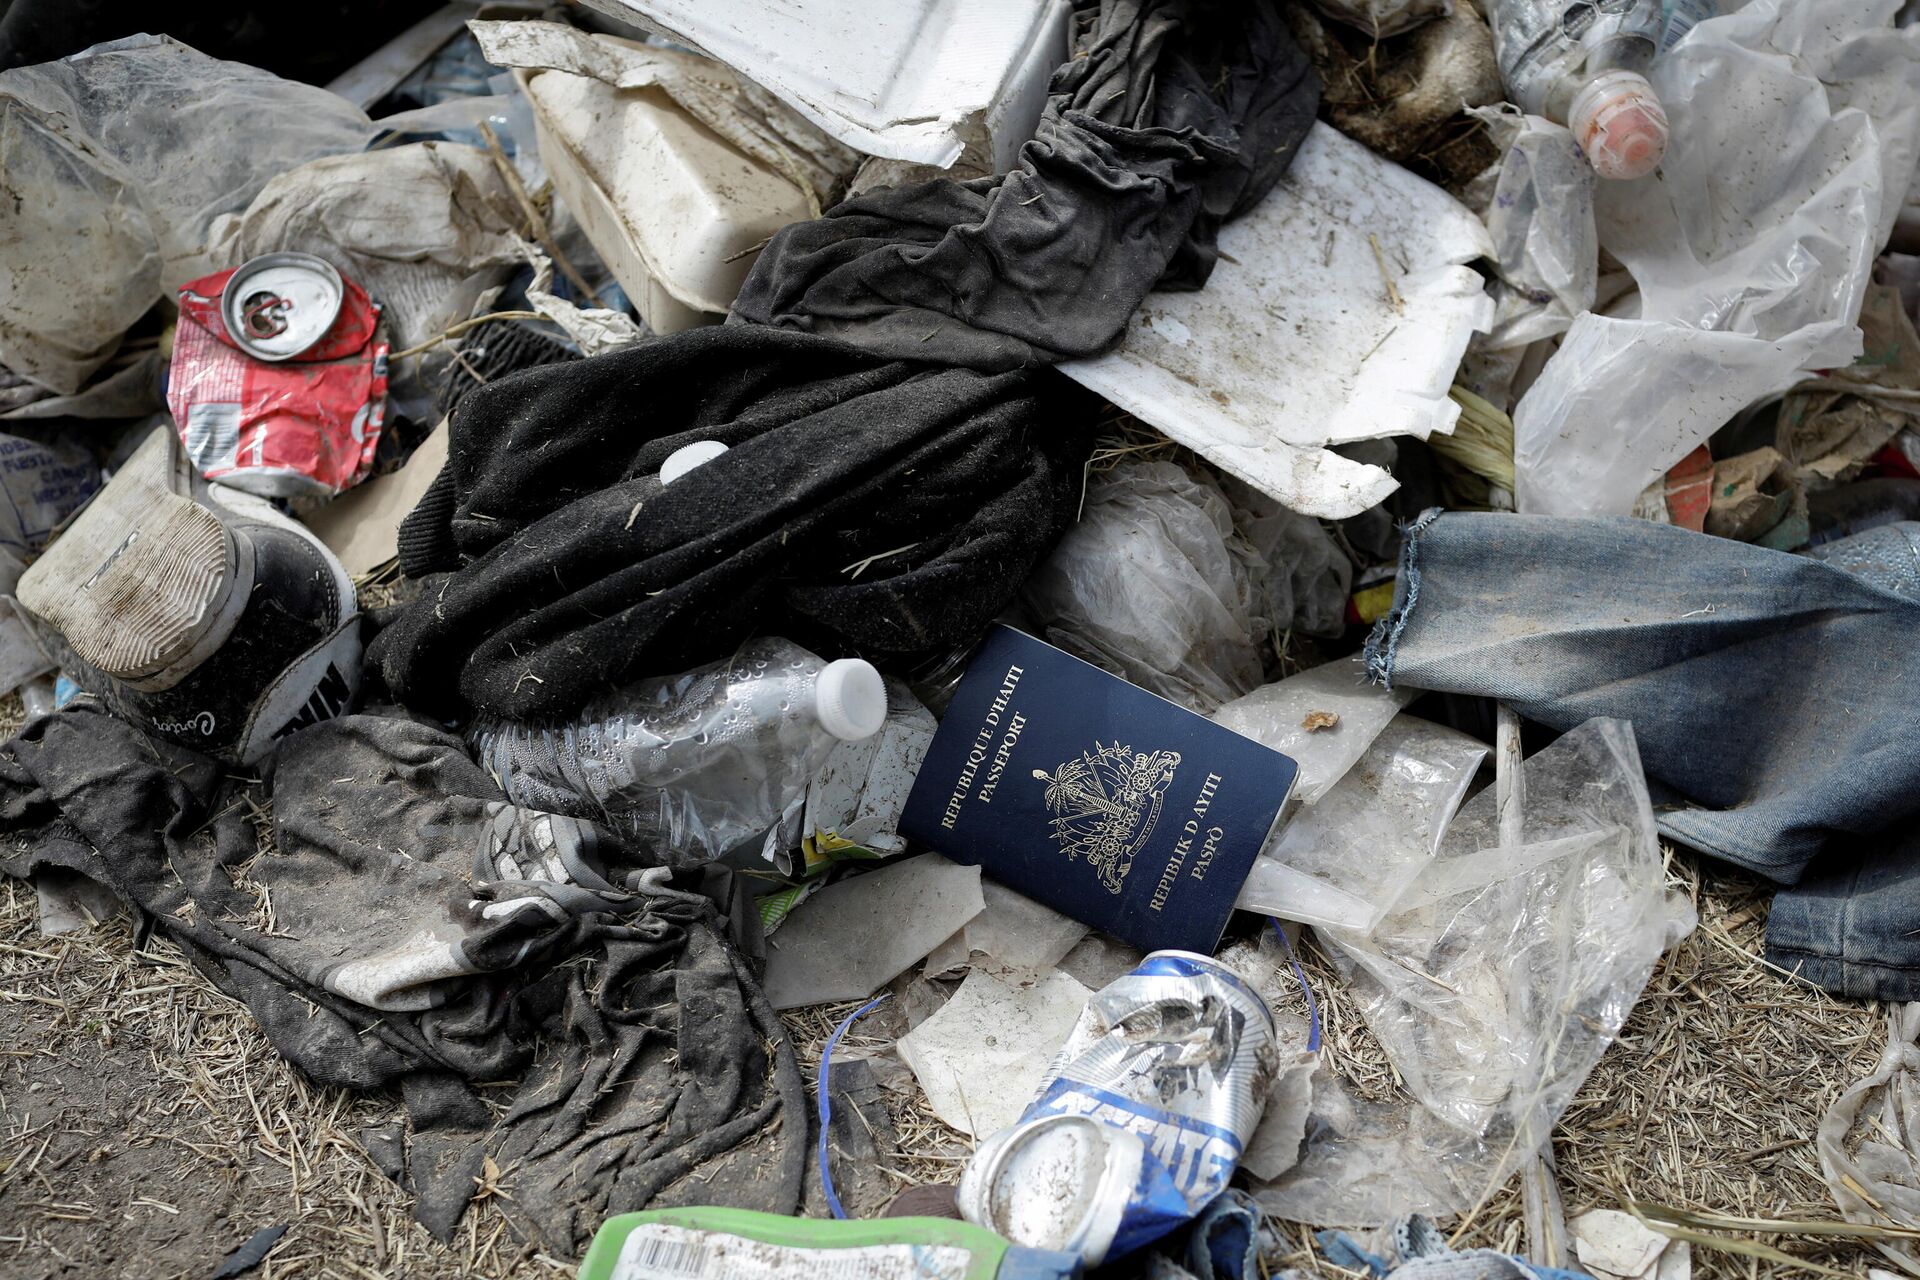 A Haitian passport is seen in a pile of trash near the International Bridge between Mexico and the U.S., where migrants seeking asylum in the U.S. are waiting to be processed, in Del Rio, Texas, U.S., September 21, 2021 - Sputnik International, 1920, 21.09.2021